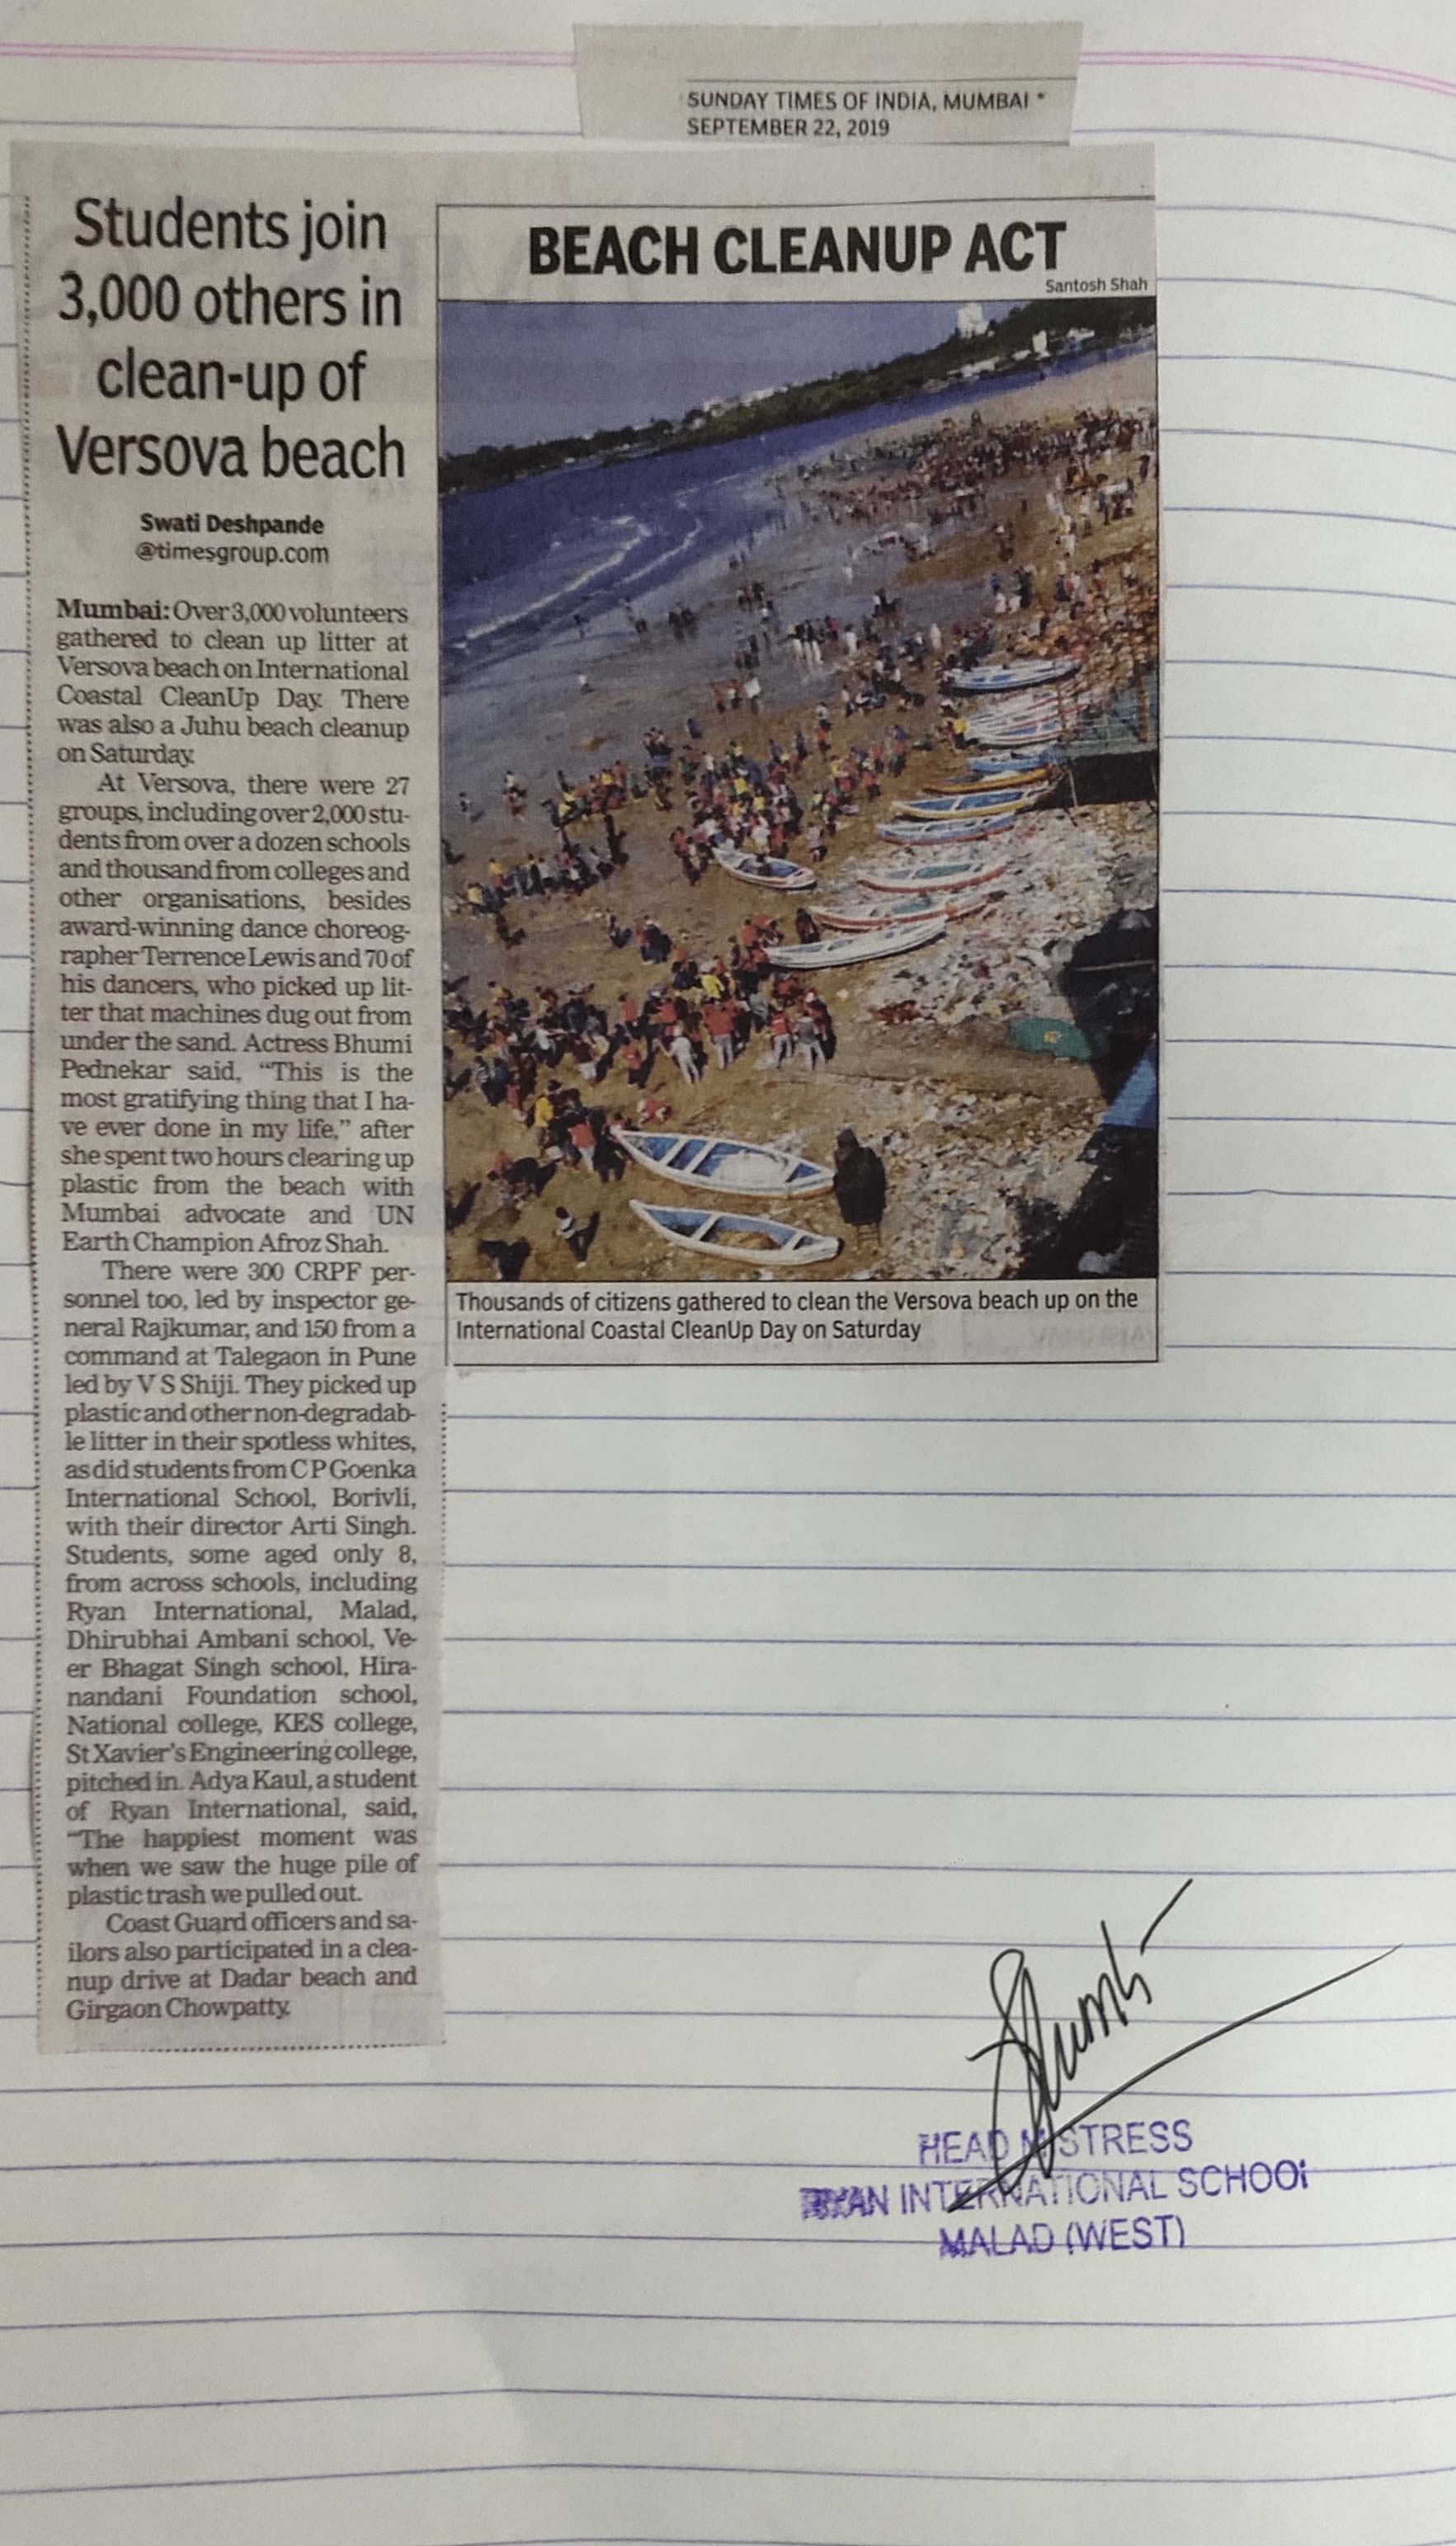 An article under the name “Beach Clean up” was published in the Times of India